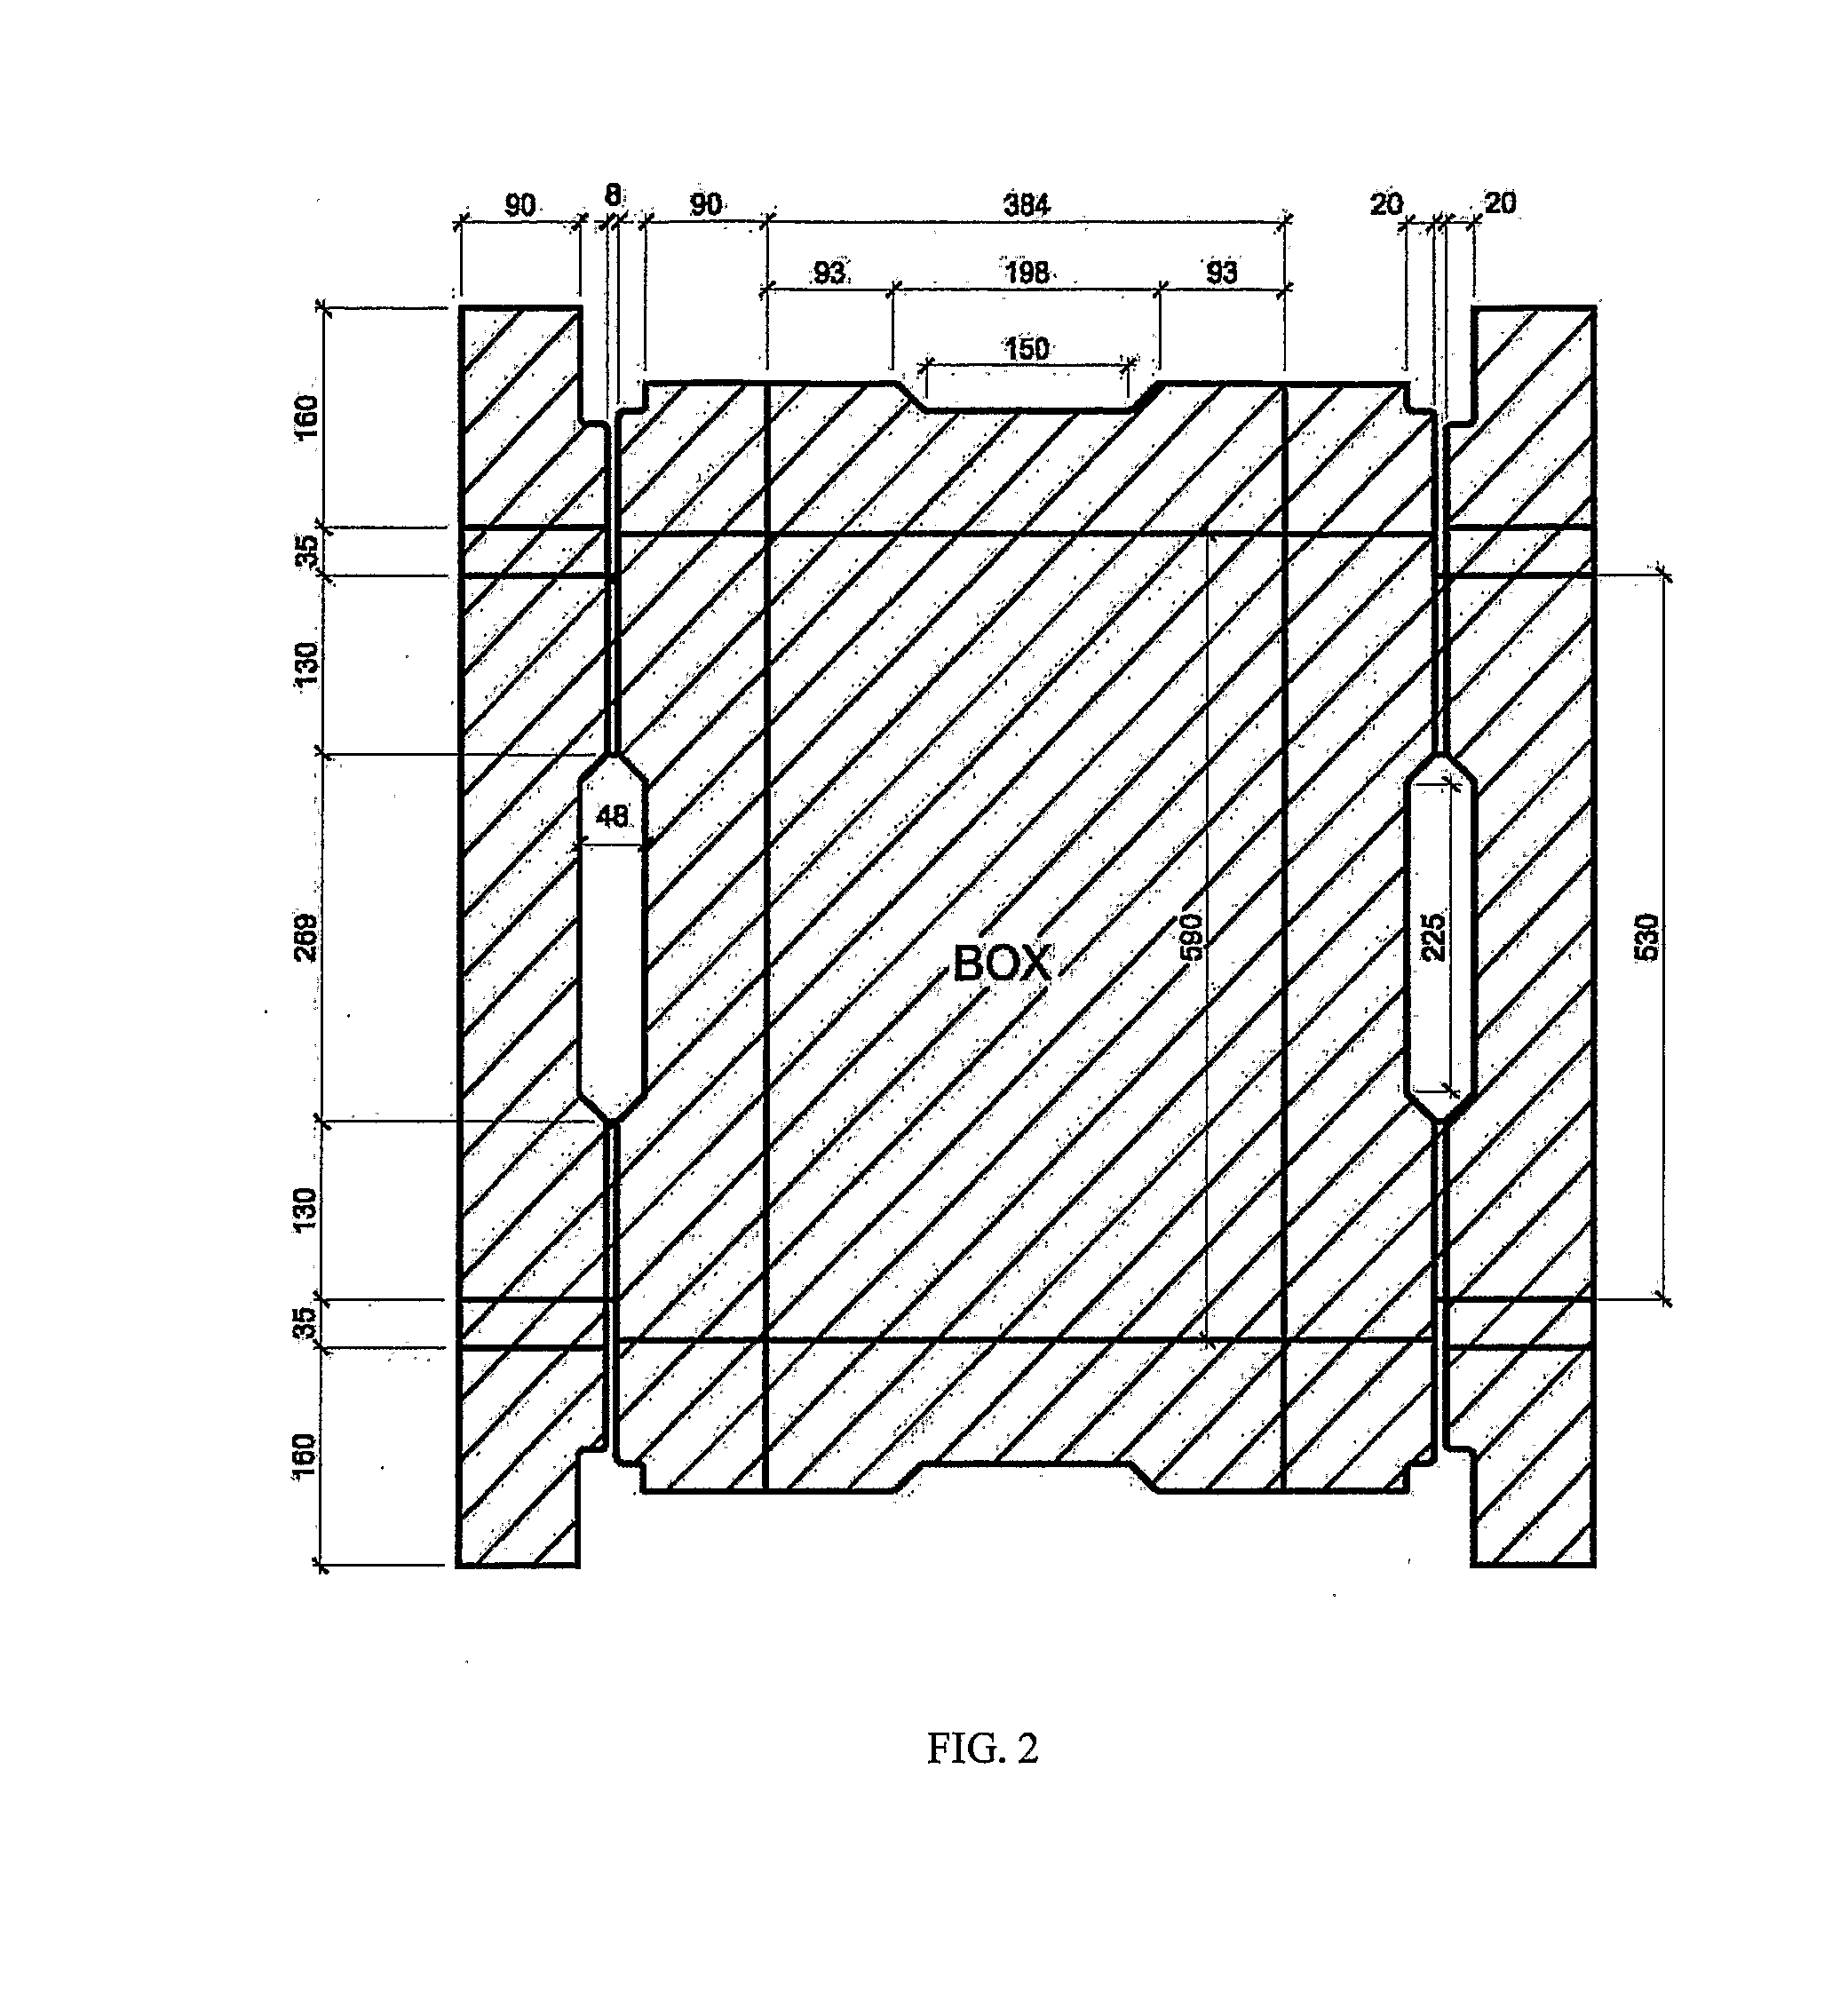 Packaging systems for the control of relative humidity of fresh fruits, vegetables and flowers with simultaneous regulation of carbon dioxide and oxygen